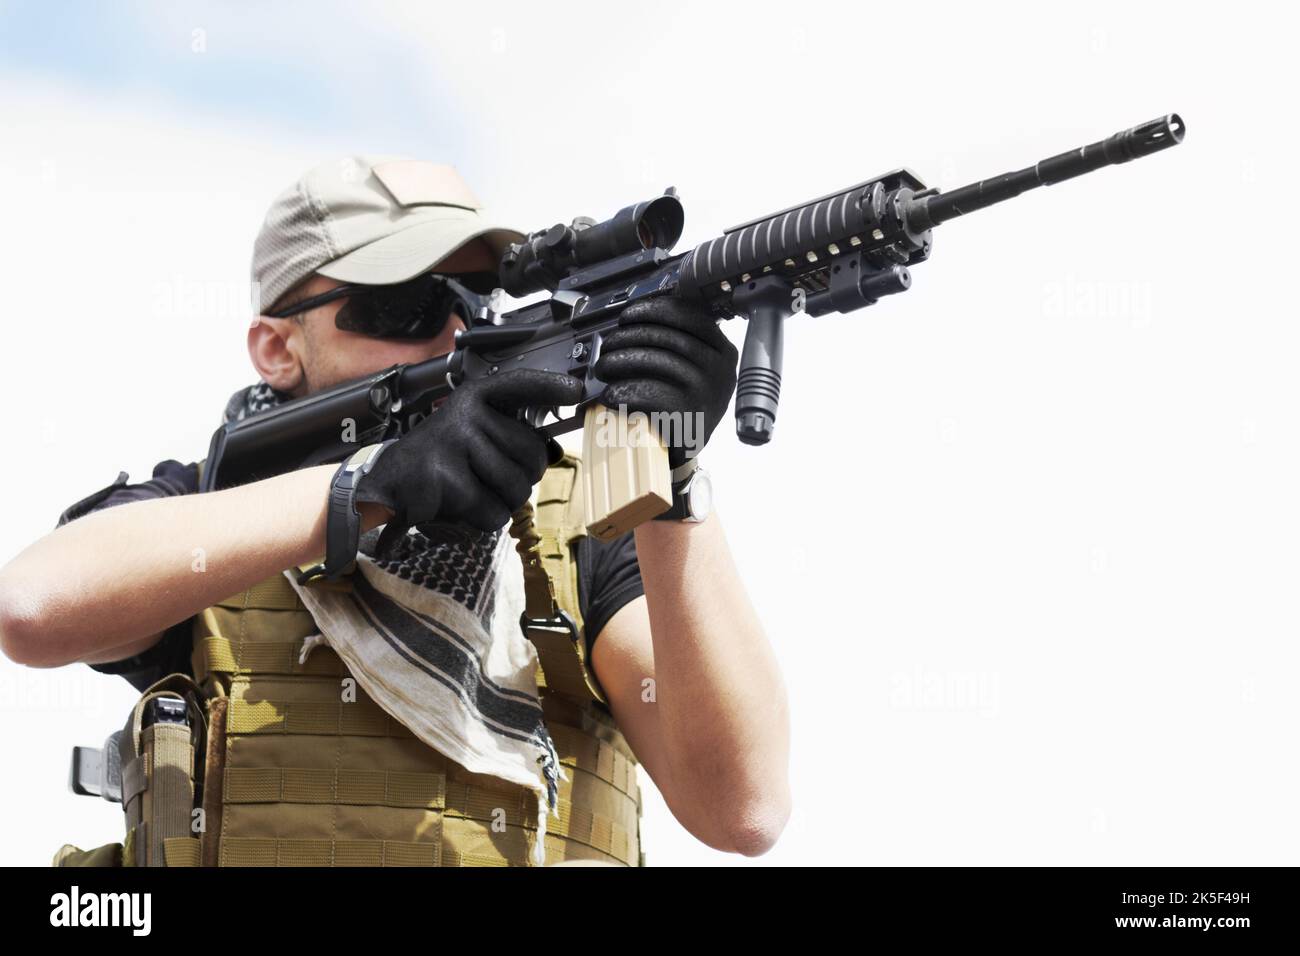 Hes got the enemy in his sights. a military sniper taking aim. Stock Photo